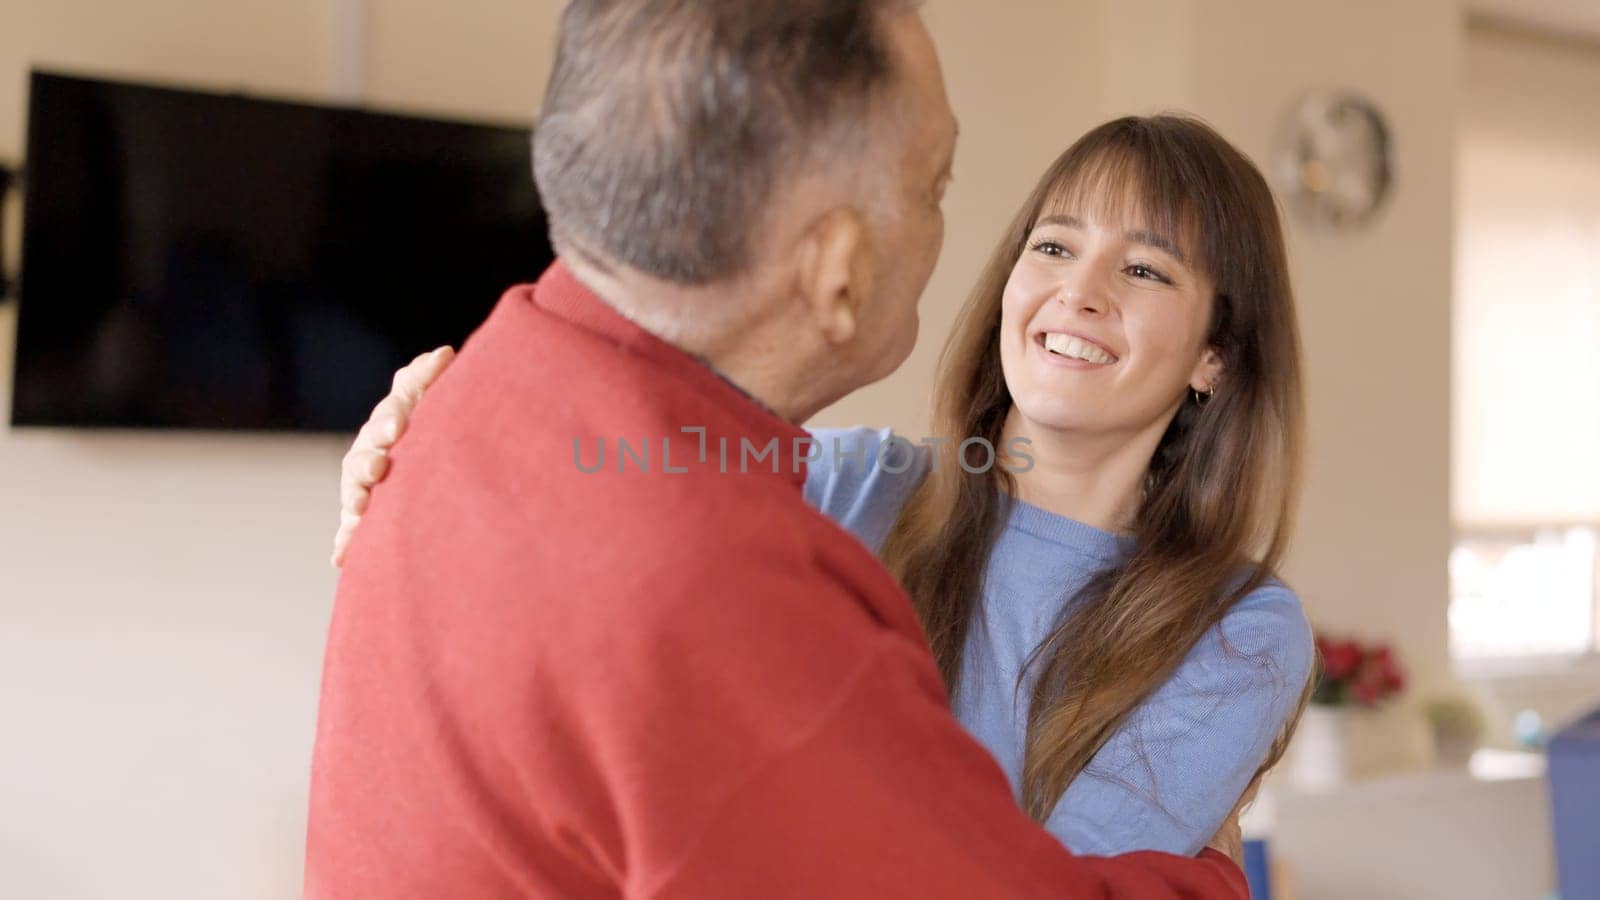 Happy grandfather receiving the visit of his granddaughter. They smile and talk